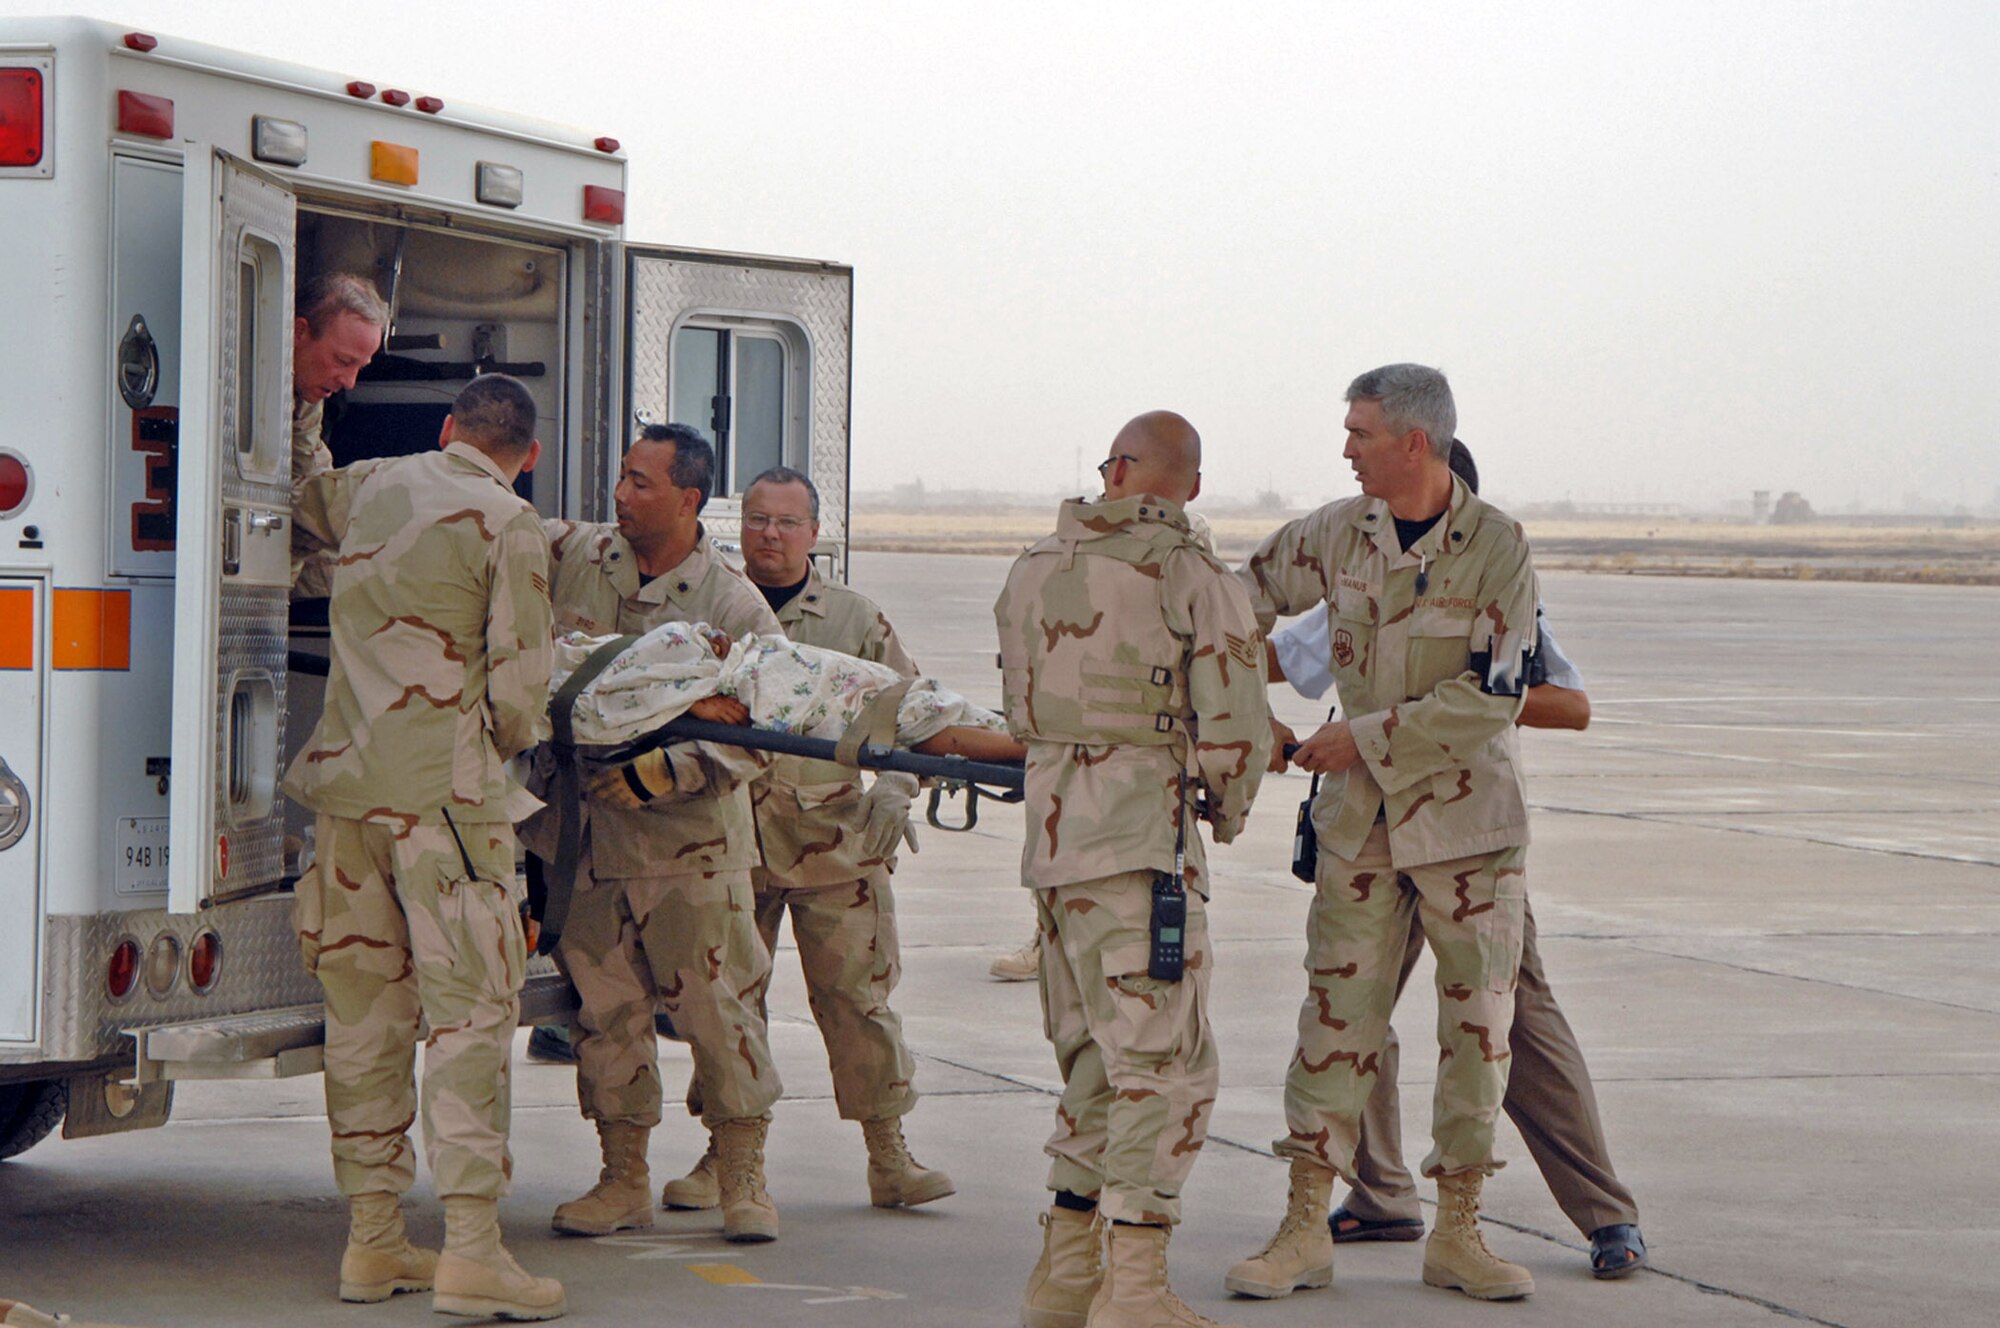 Members of the 506th Air Expeditionary Group help transport Iraqi vehicle borne improvised explosive device victims to a Turkish airplane during a multinational humanitarian airlift effort July 8 at Kirkuk Air Base, Iraq. The victims were hurt in the July 7 market bombing in Tuz Khurmato, Iraq. Airmen from the 506th AEG worked with Iraqi medical providers and Turkish army and air force members to receive, transfer and aerovac almost 30 injured Turkmen civilians and family members to the Turkish capital city of Ankara for further treatment. (U.S. Air Force photo/Senior Airman Kristin Ruleau)
